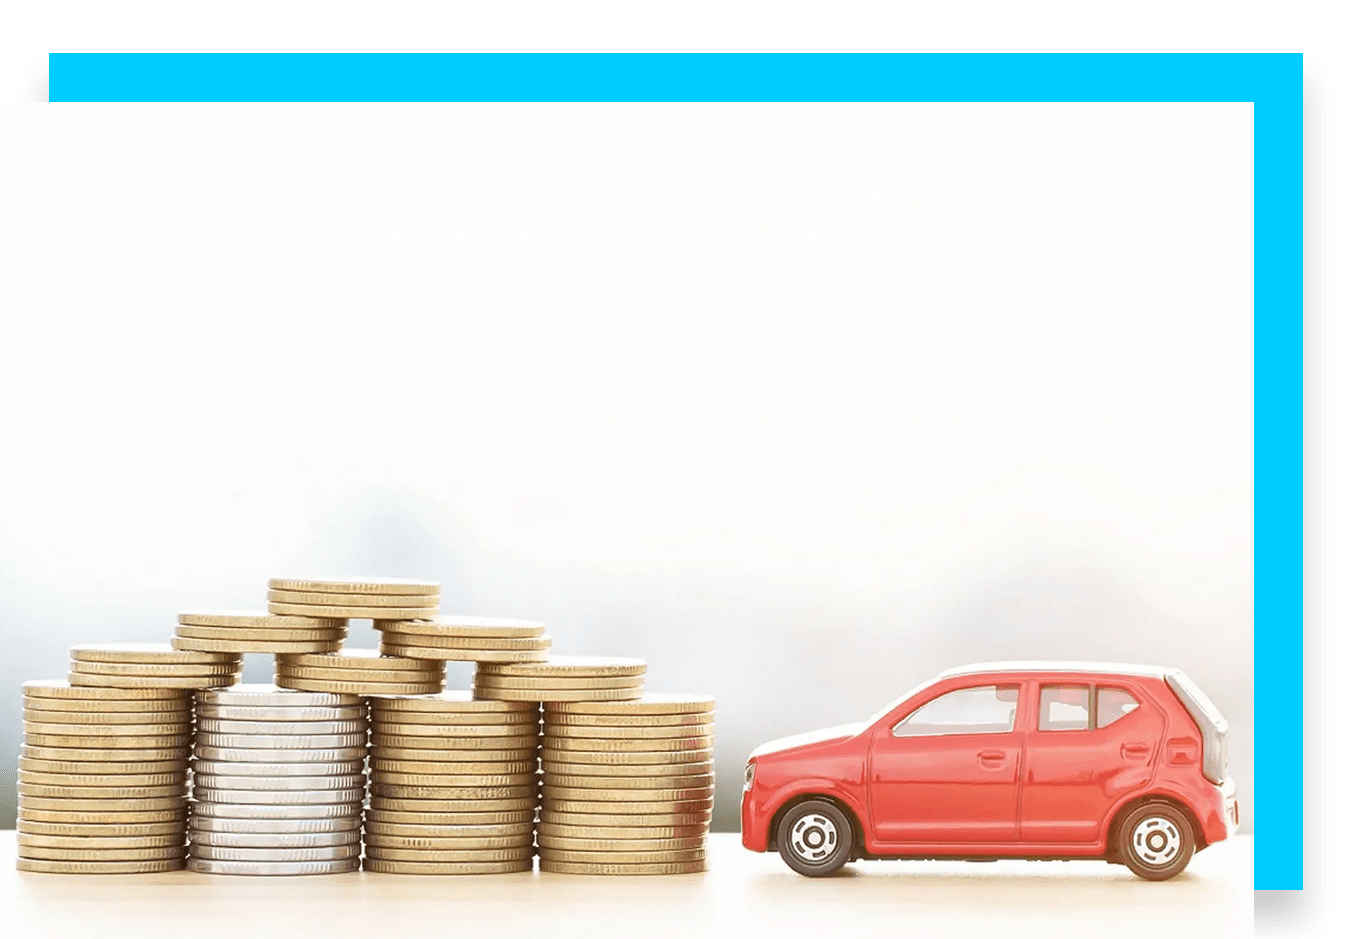 A red car sitting in front of stacks of coins.